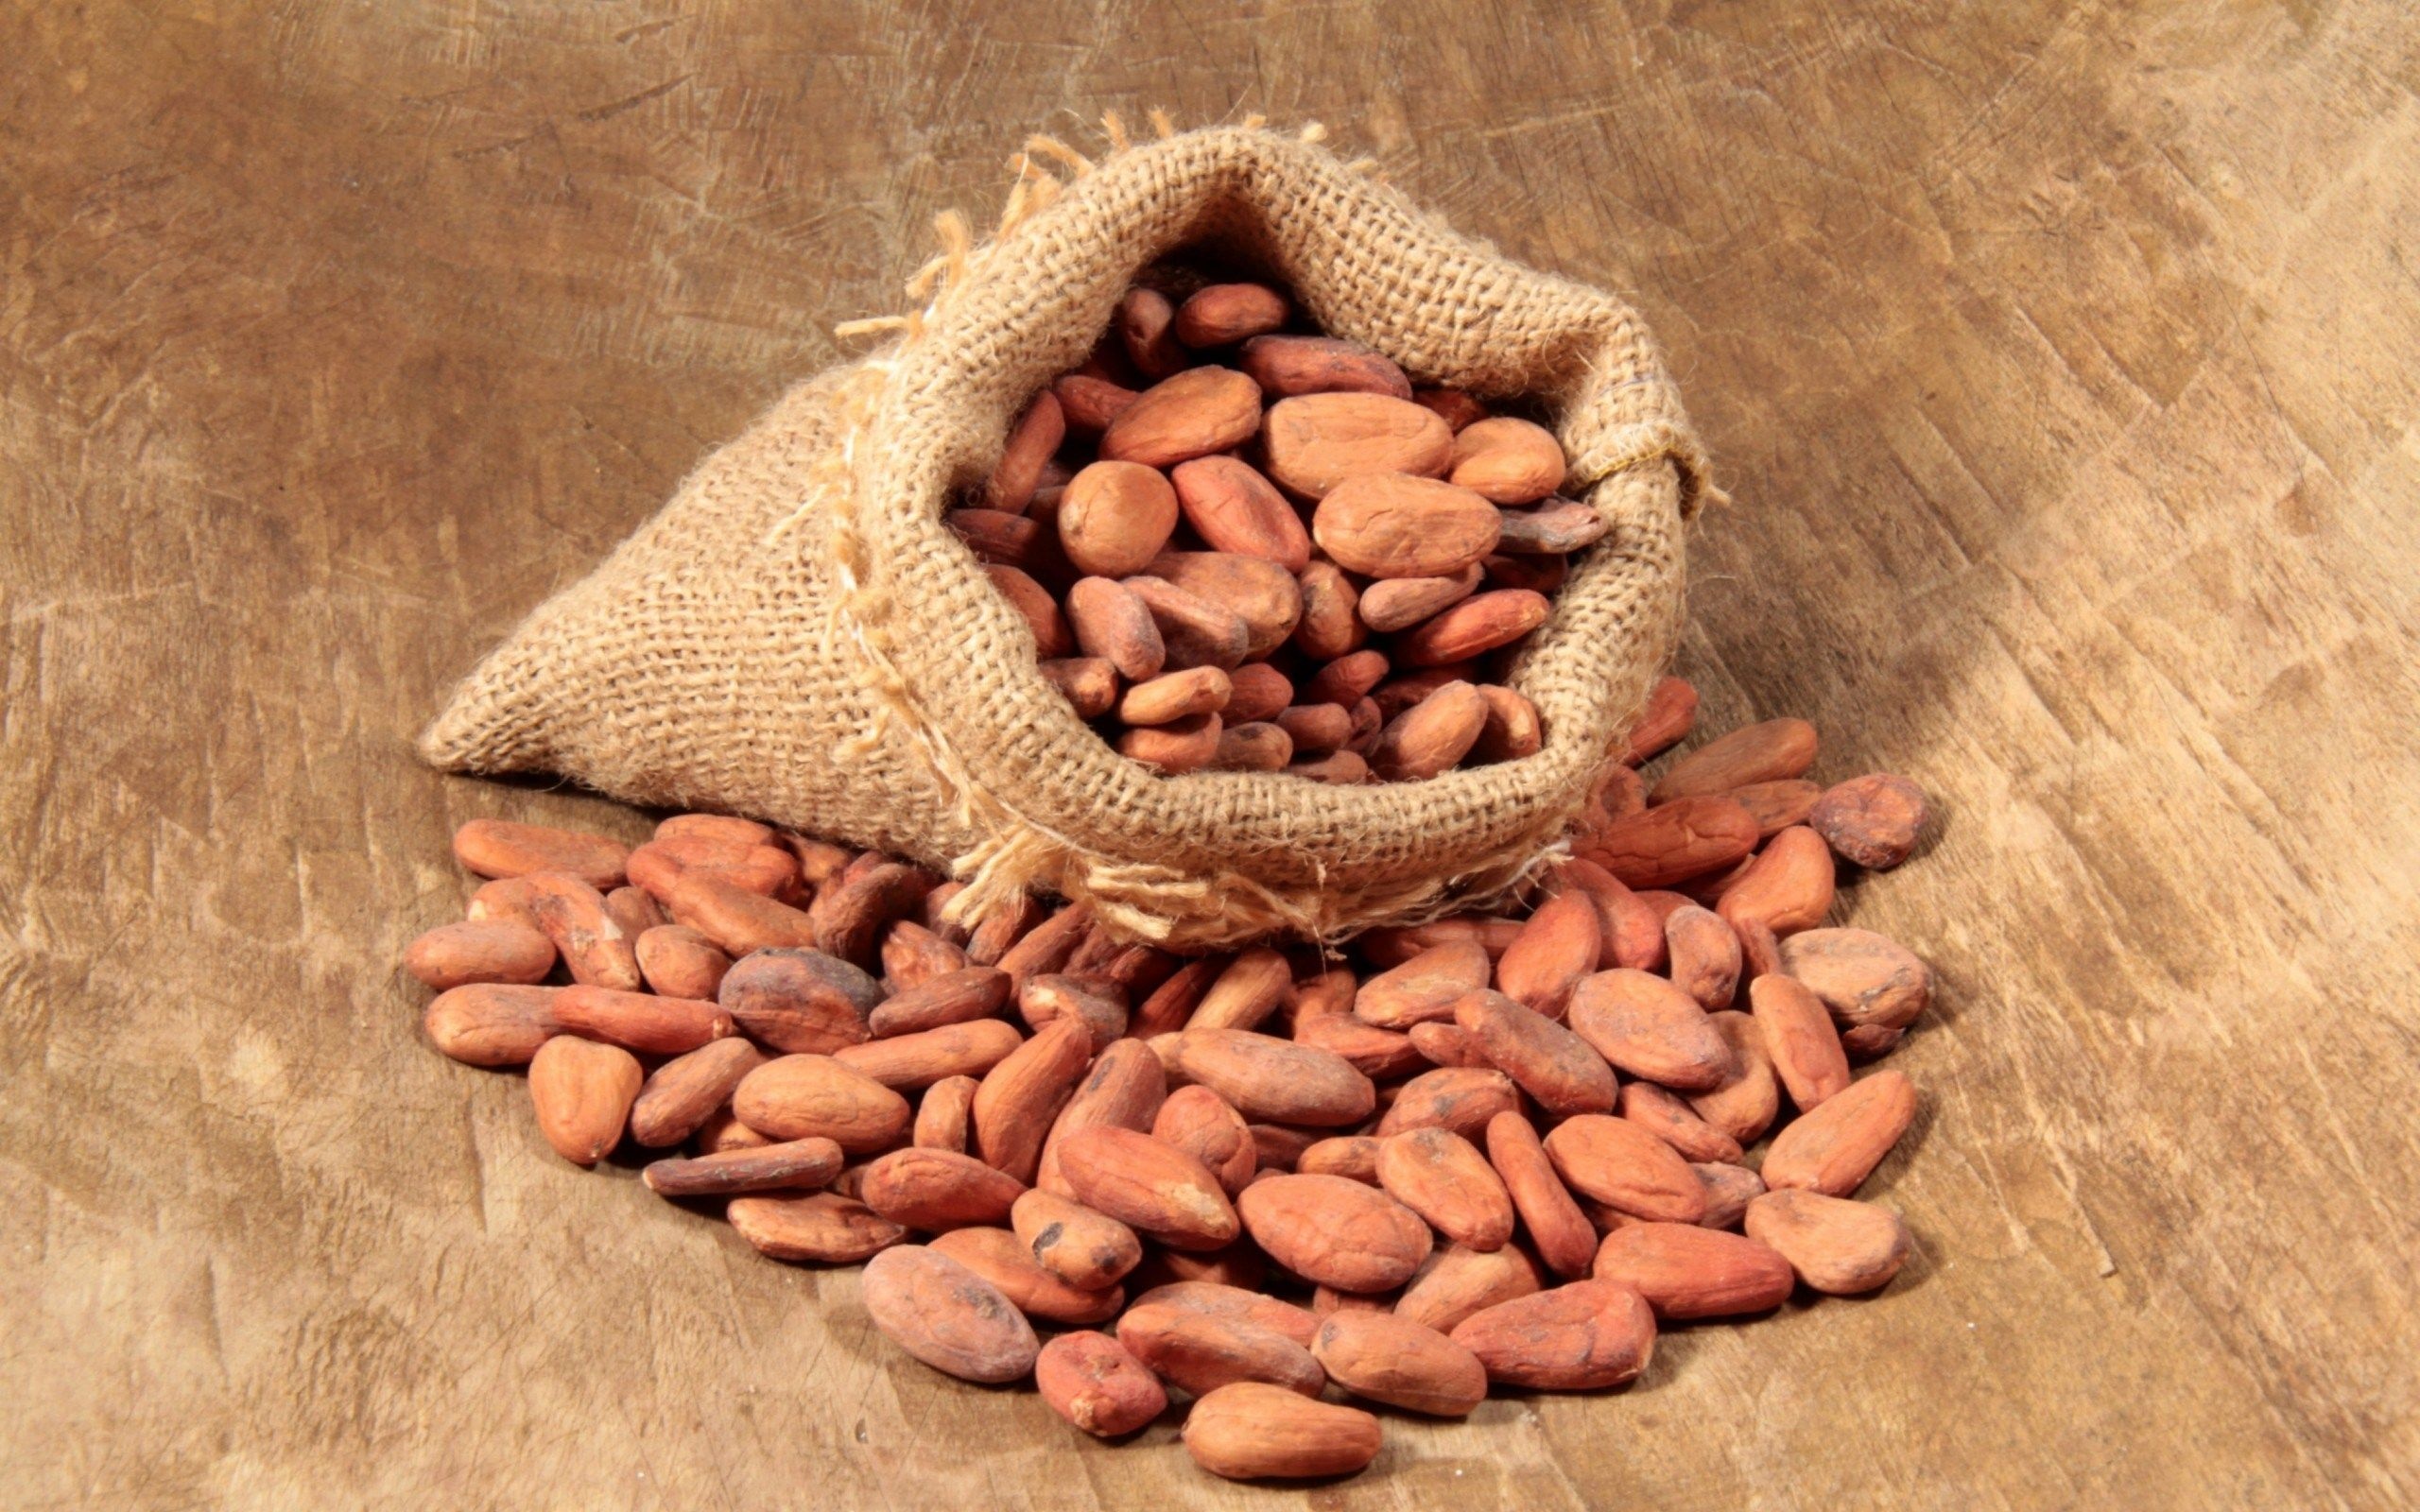 Seeds: Cocoa bean, Native to the Amazon rainforest, The basis of chocolate. 2560x1600 HD Wallpaper.